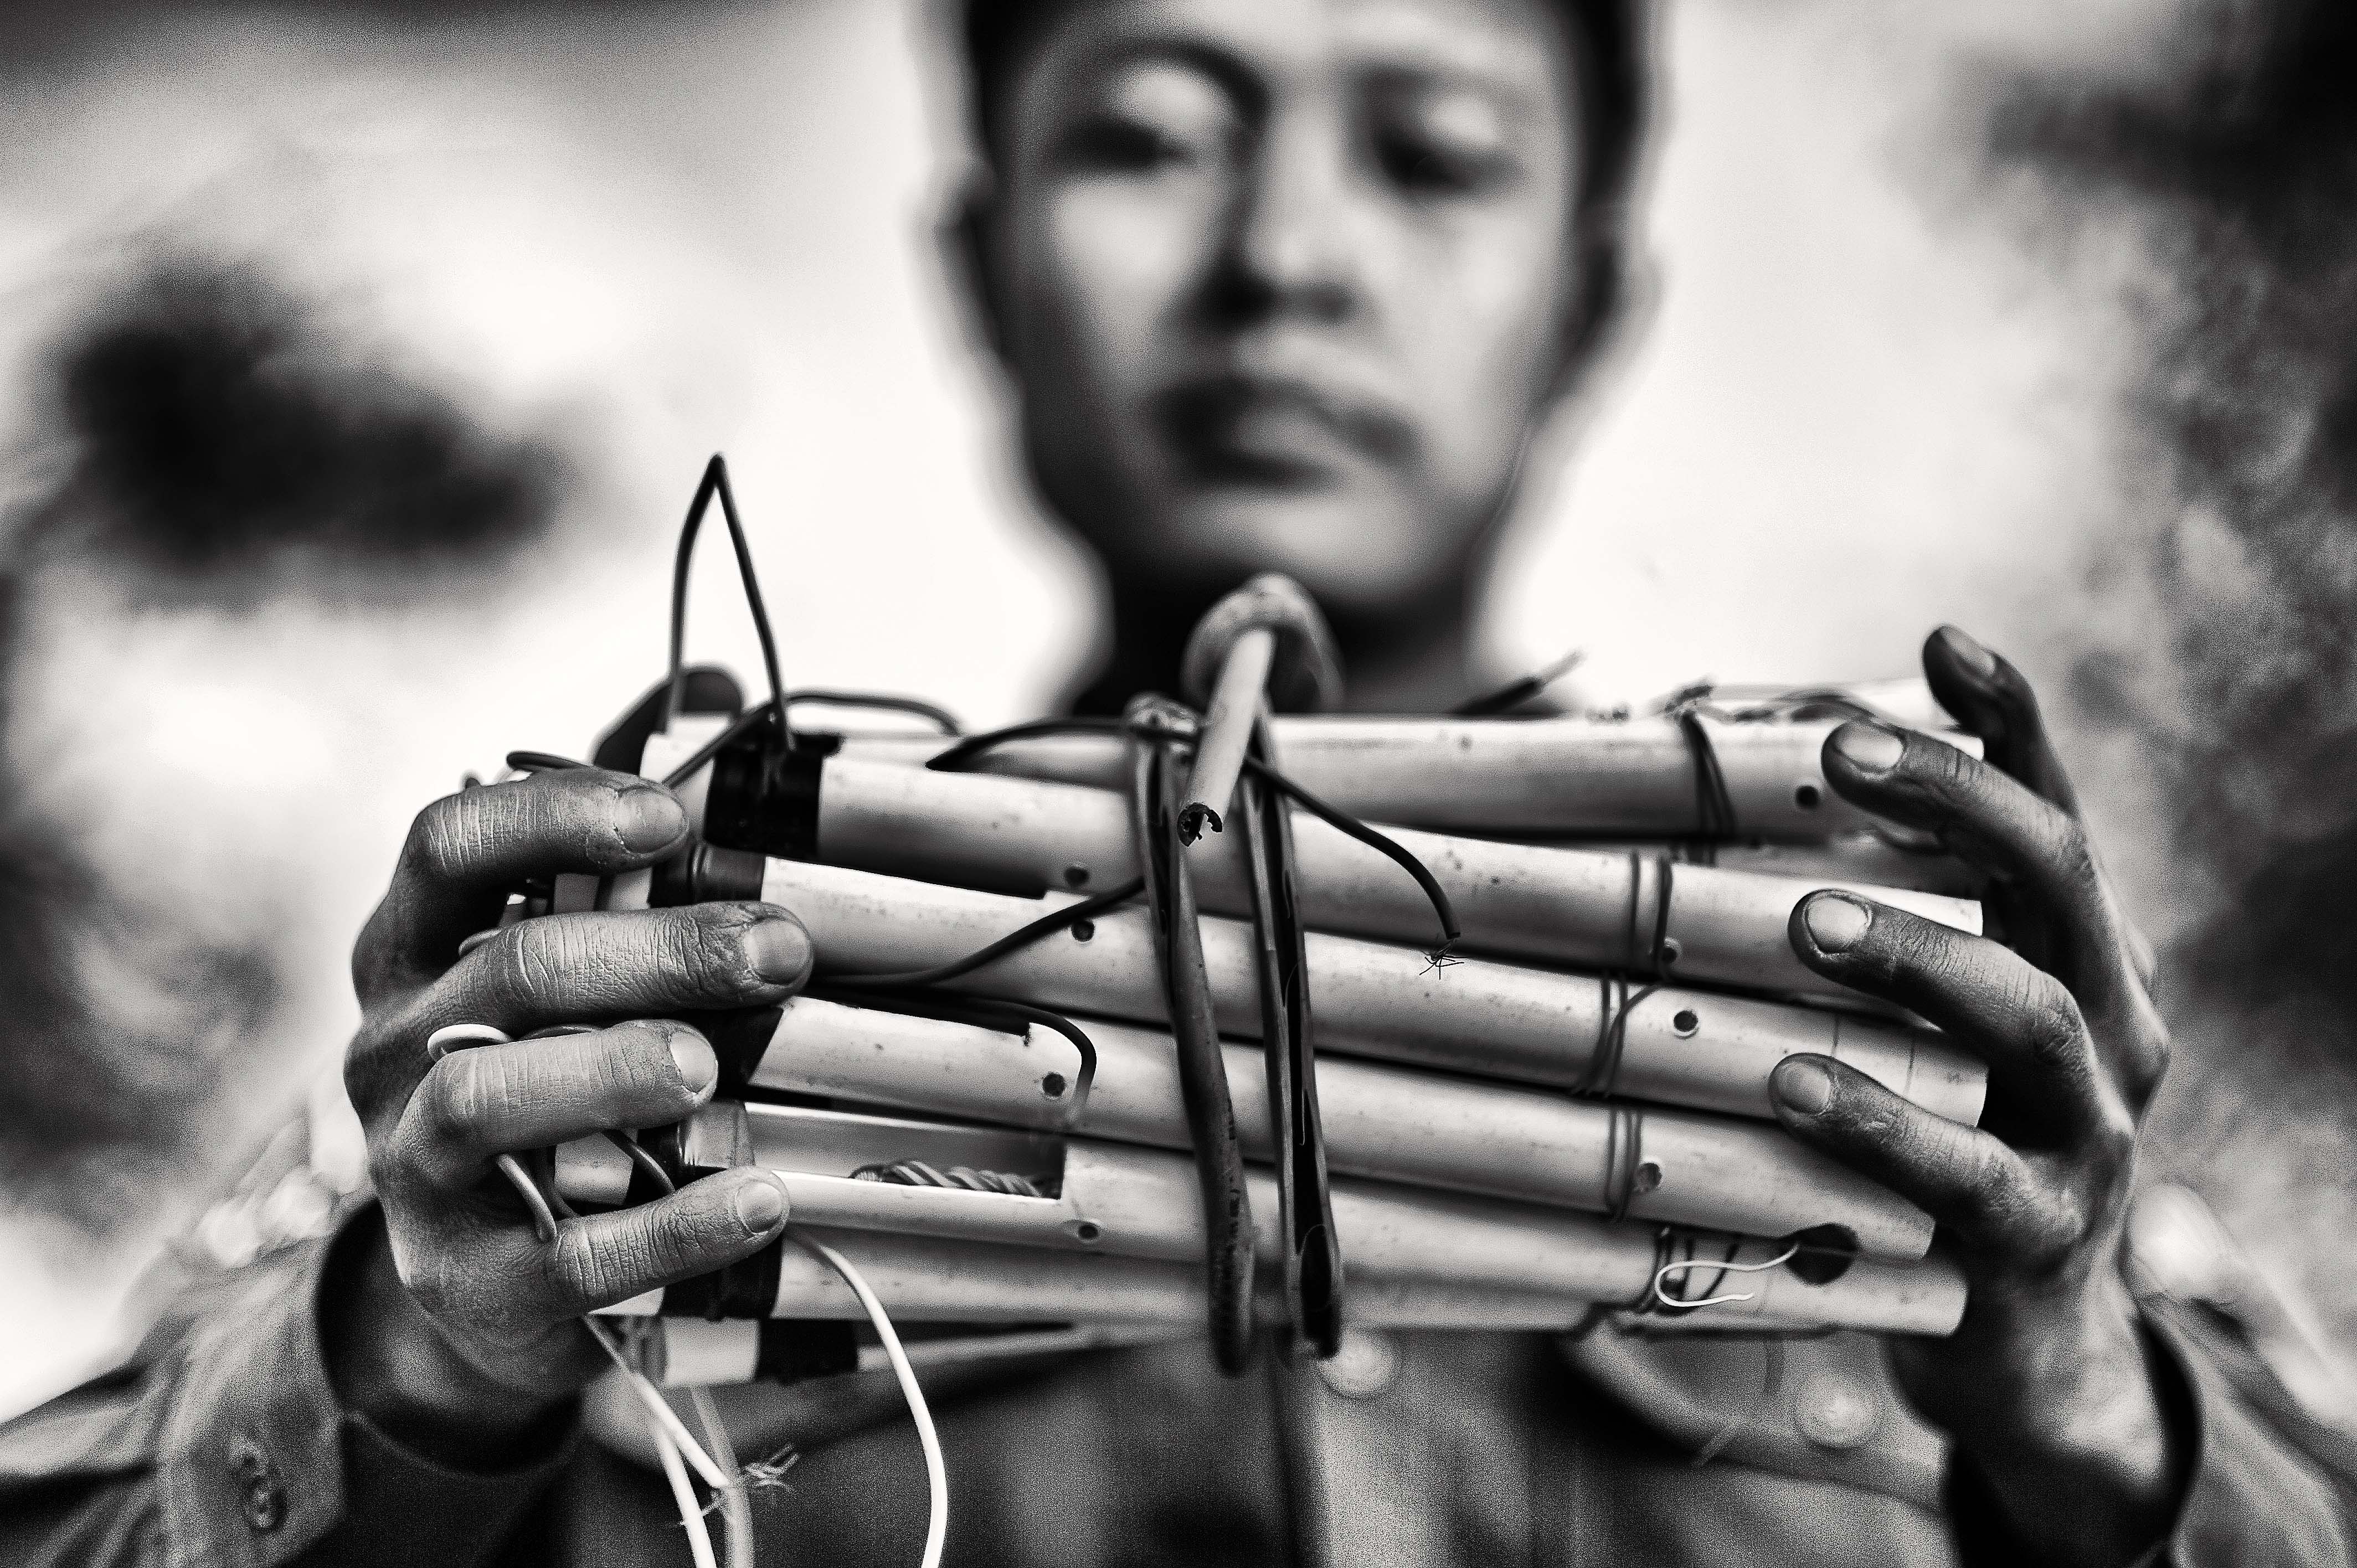 A Kachin Independence Army soldier holds landmines that he made at a front line army camp. Two weeks later, he was killed after one exploded while planting it in the jungle.